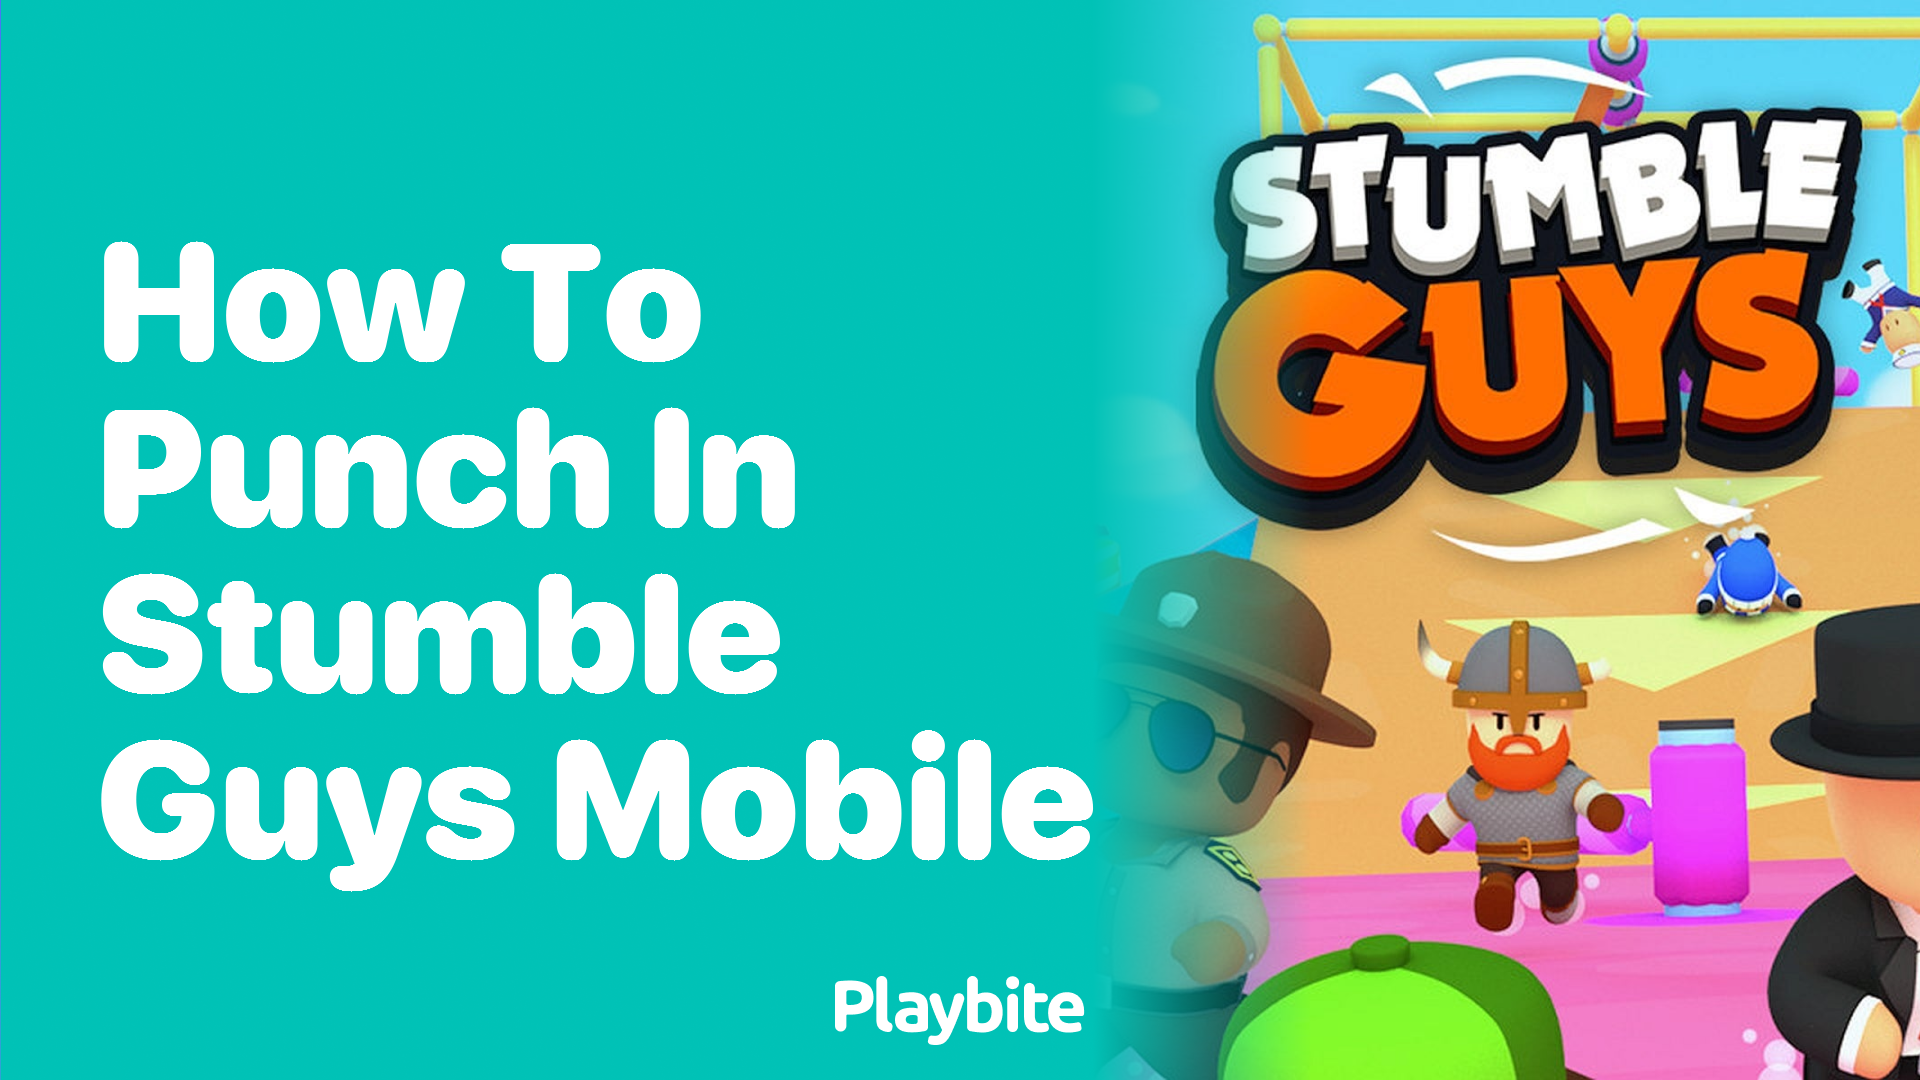 How to Punch in Stumble Guys Mobile: Unlock the Secret!